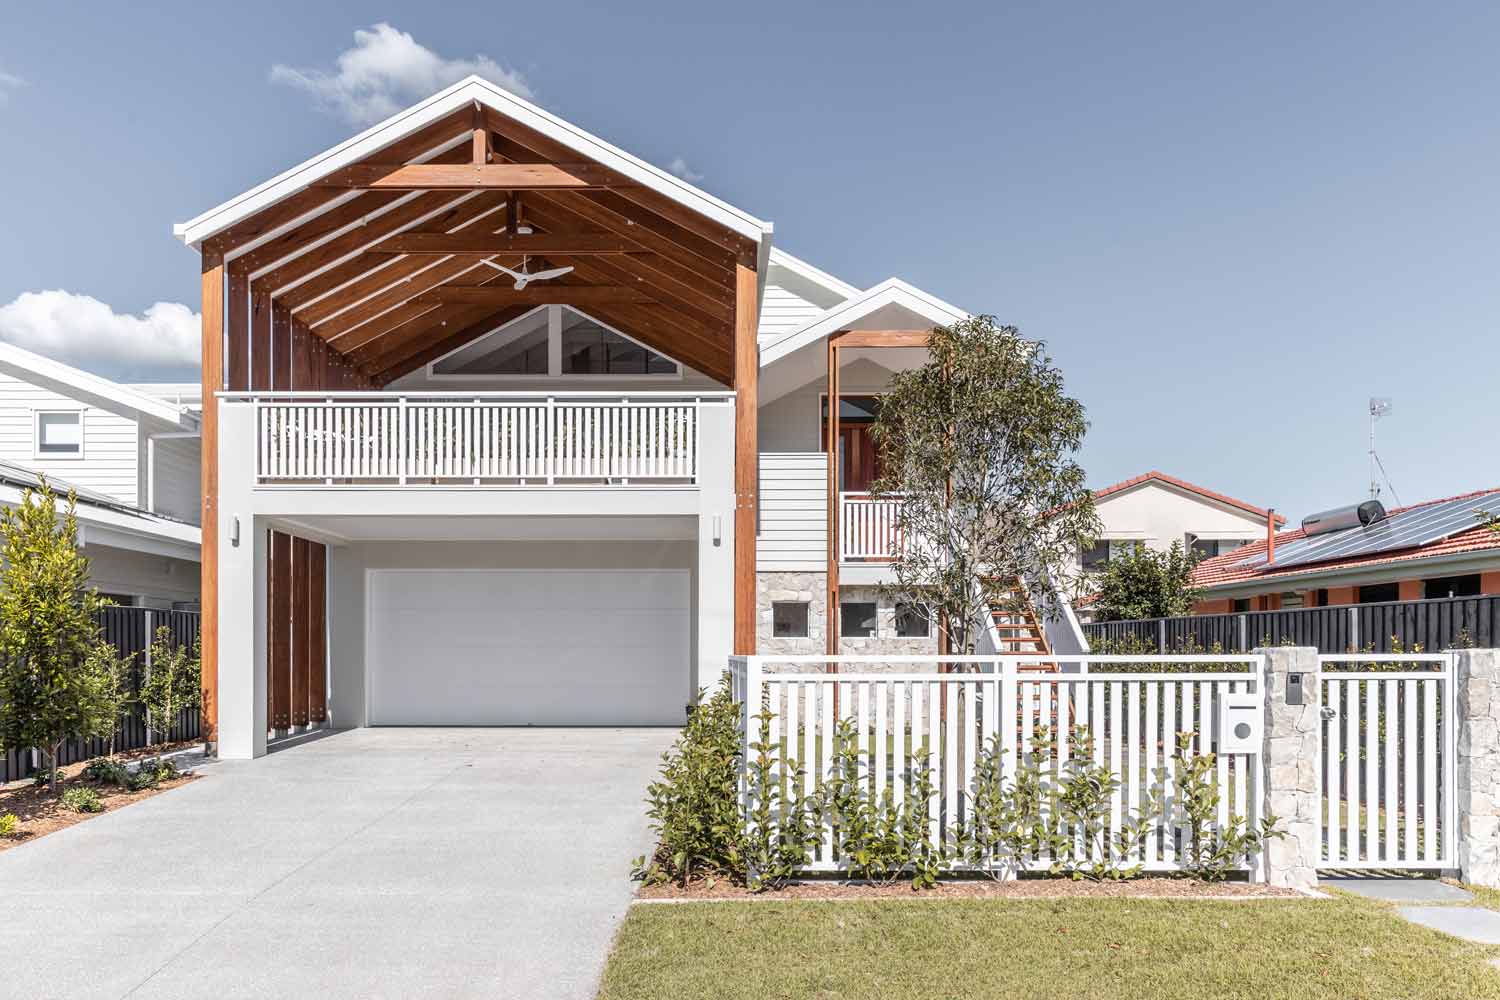 White weatherboard coastal house with timber cladding and 4 car garage